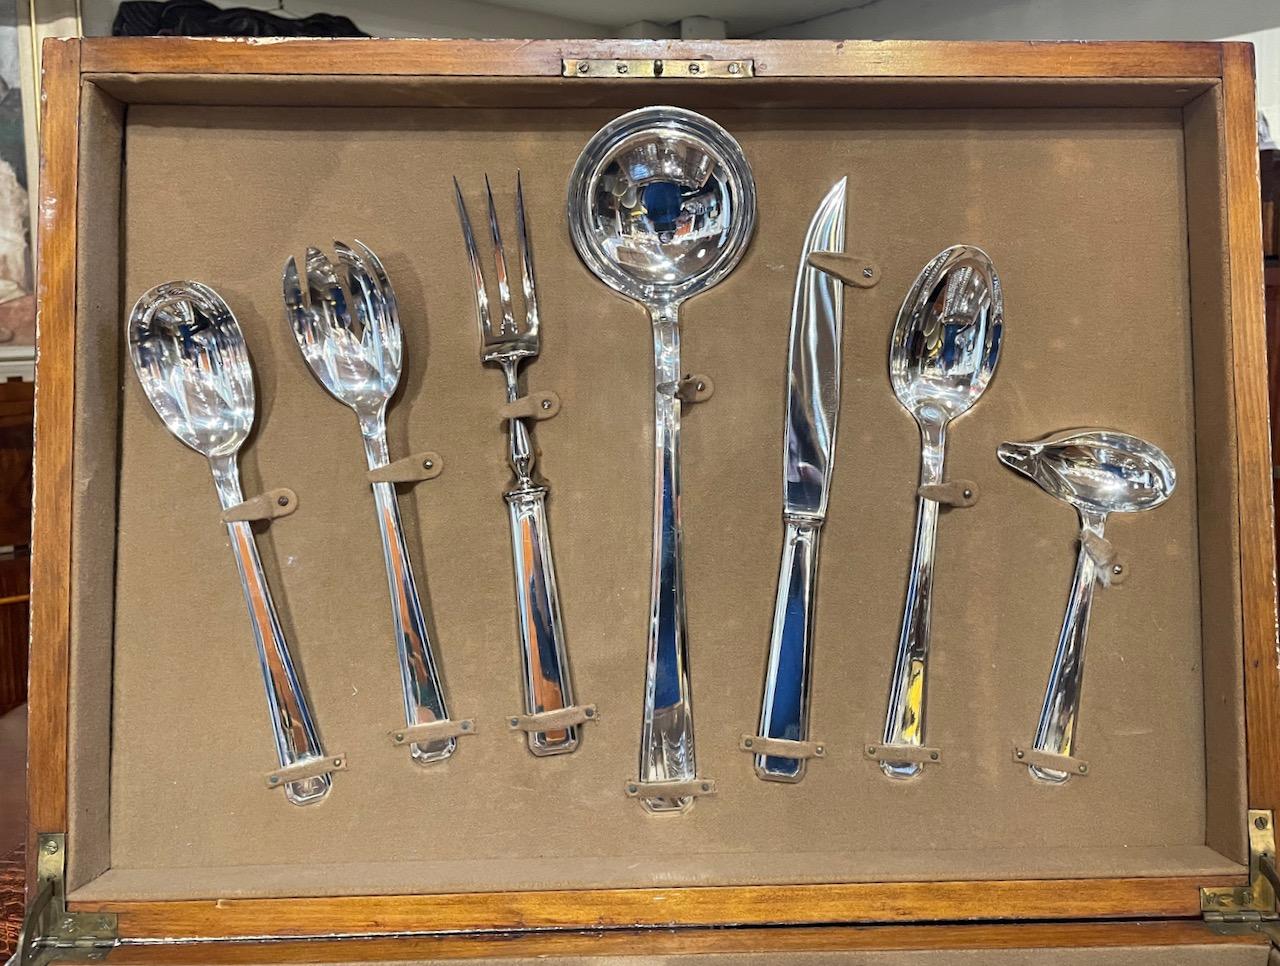 Mid-20th Century Complete Art Deco Silverware Service for 12 by Ravinet d'Enfert of France